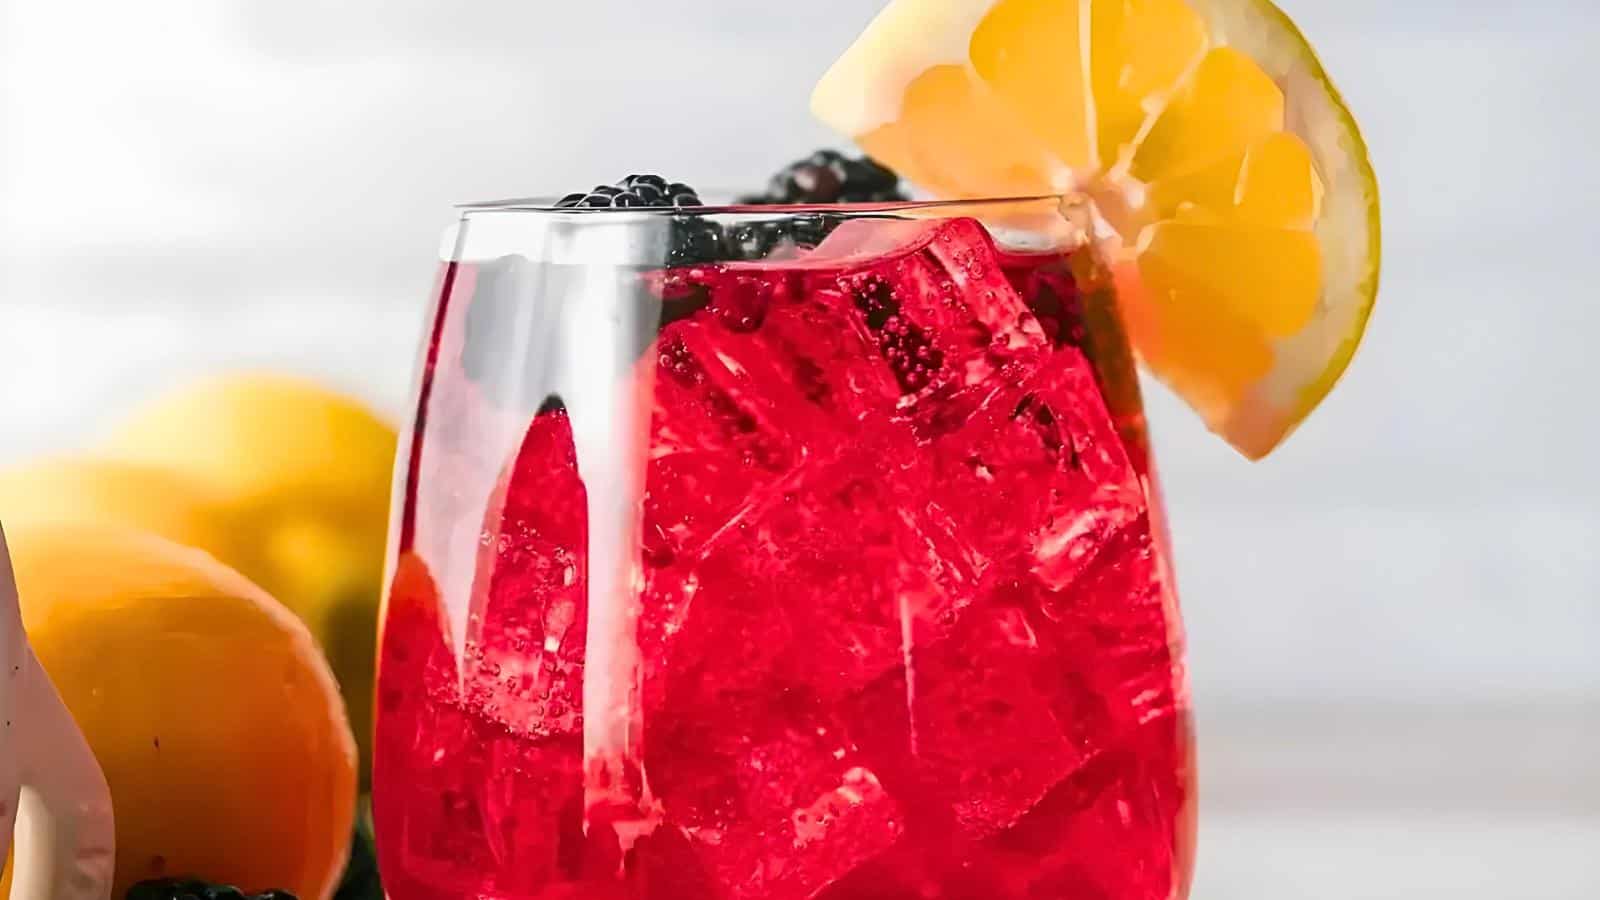 <p>The Blackberry Bramble is a berry lover’s dream. Gin, blackberry liqueur, and fresh lemon juice create a tart and sweet summer cocktail. It’s a simple yet elegant choice for any summer event.<br><strong>Get the Recipe: </strong><a href="https://www.sweetteaandthyme.com/blackberry-bramble/?utm_source=msn&utm_medium=page&utm_campaign=msn" rel="noopener">Blackberry Bramble</a></p>